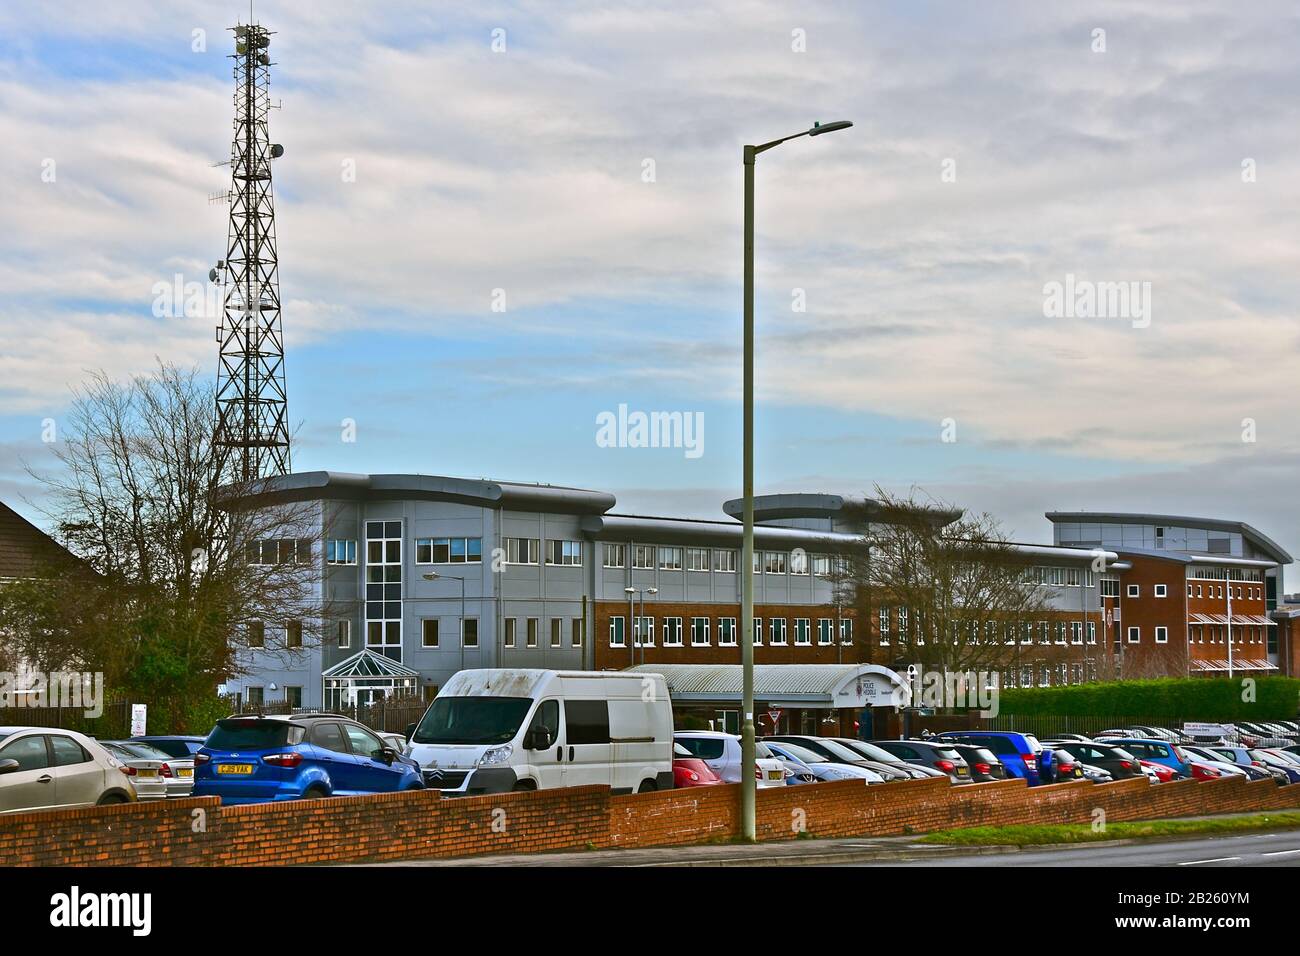 The South Wales Police Headquarters premises, which is located on Cowbridge Road in the outskirts of Bridgend. Stock Photo